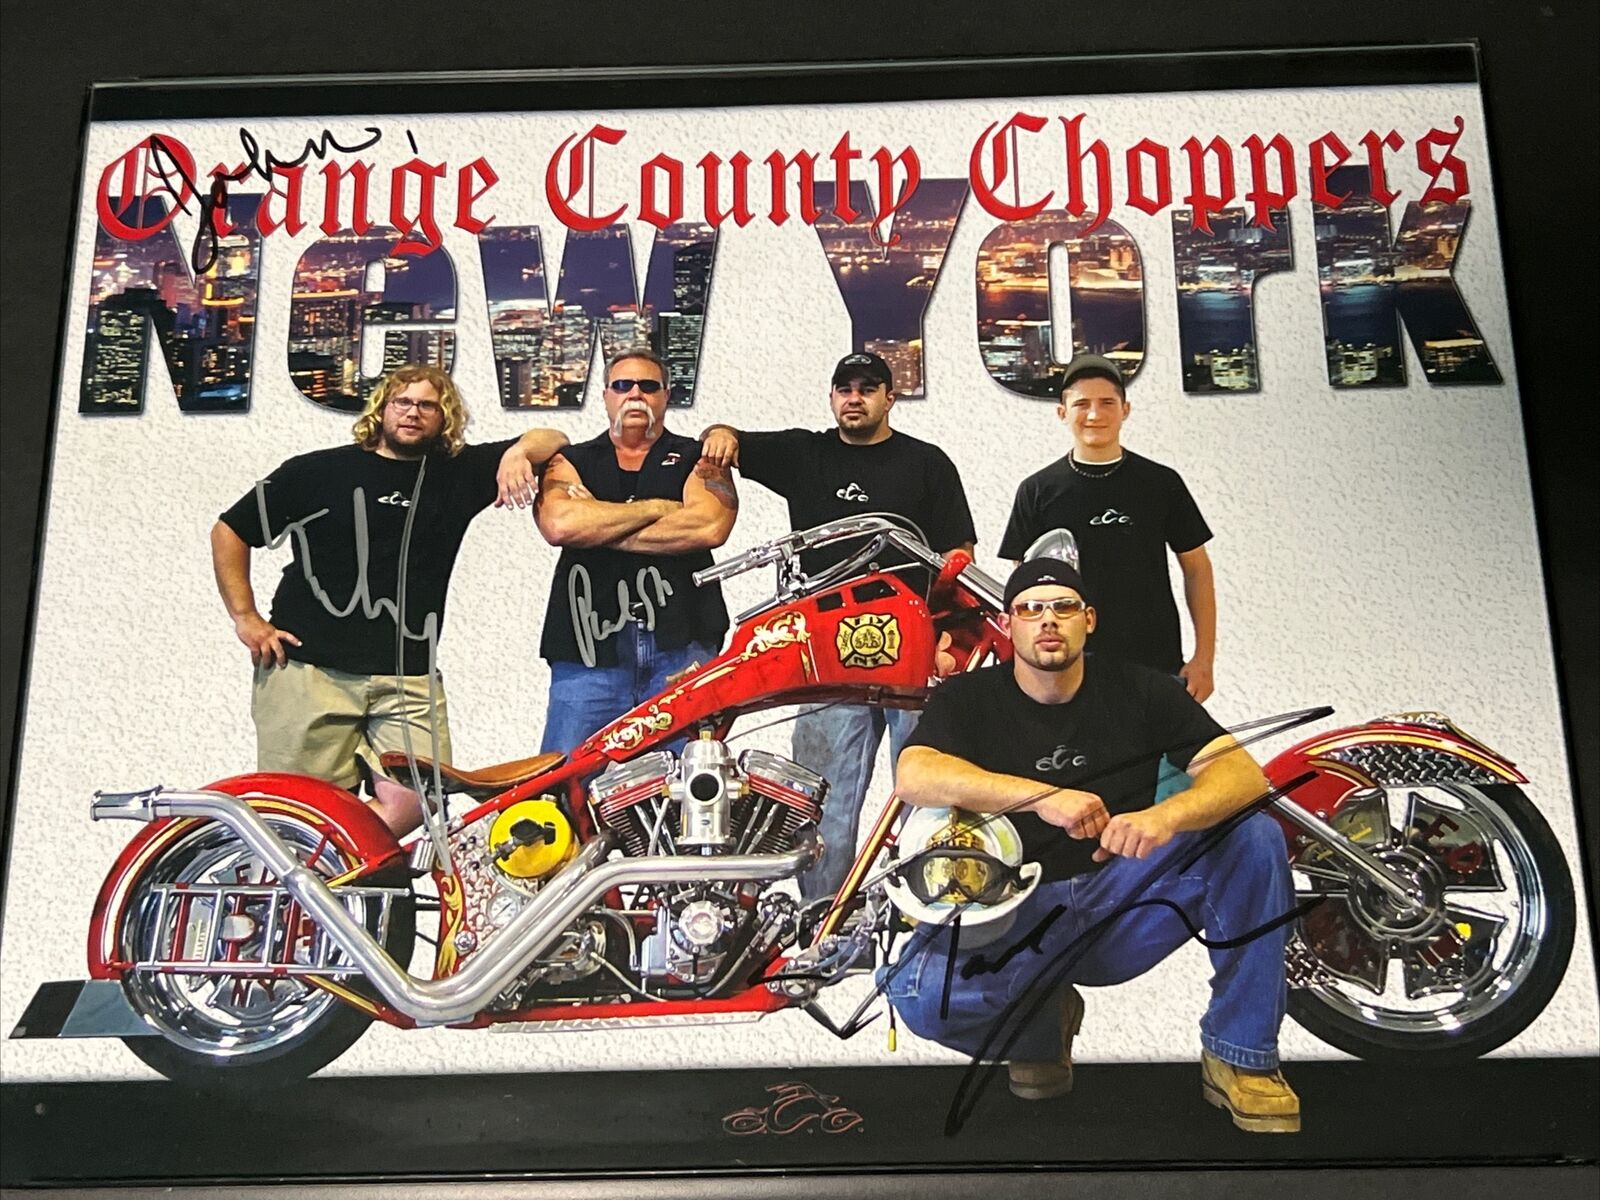 Orange County Choppers Motorcycles Autographed & Framed Picture. 14”x11”